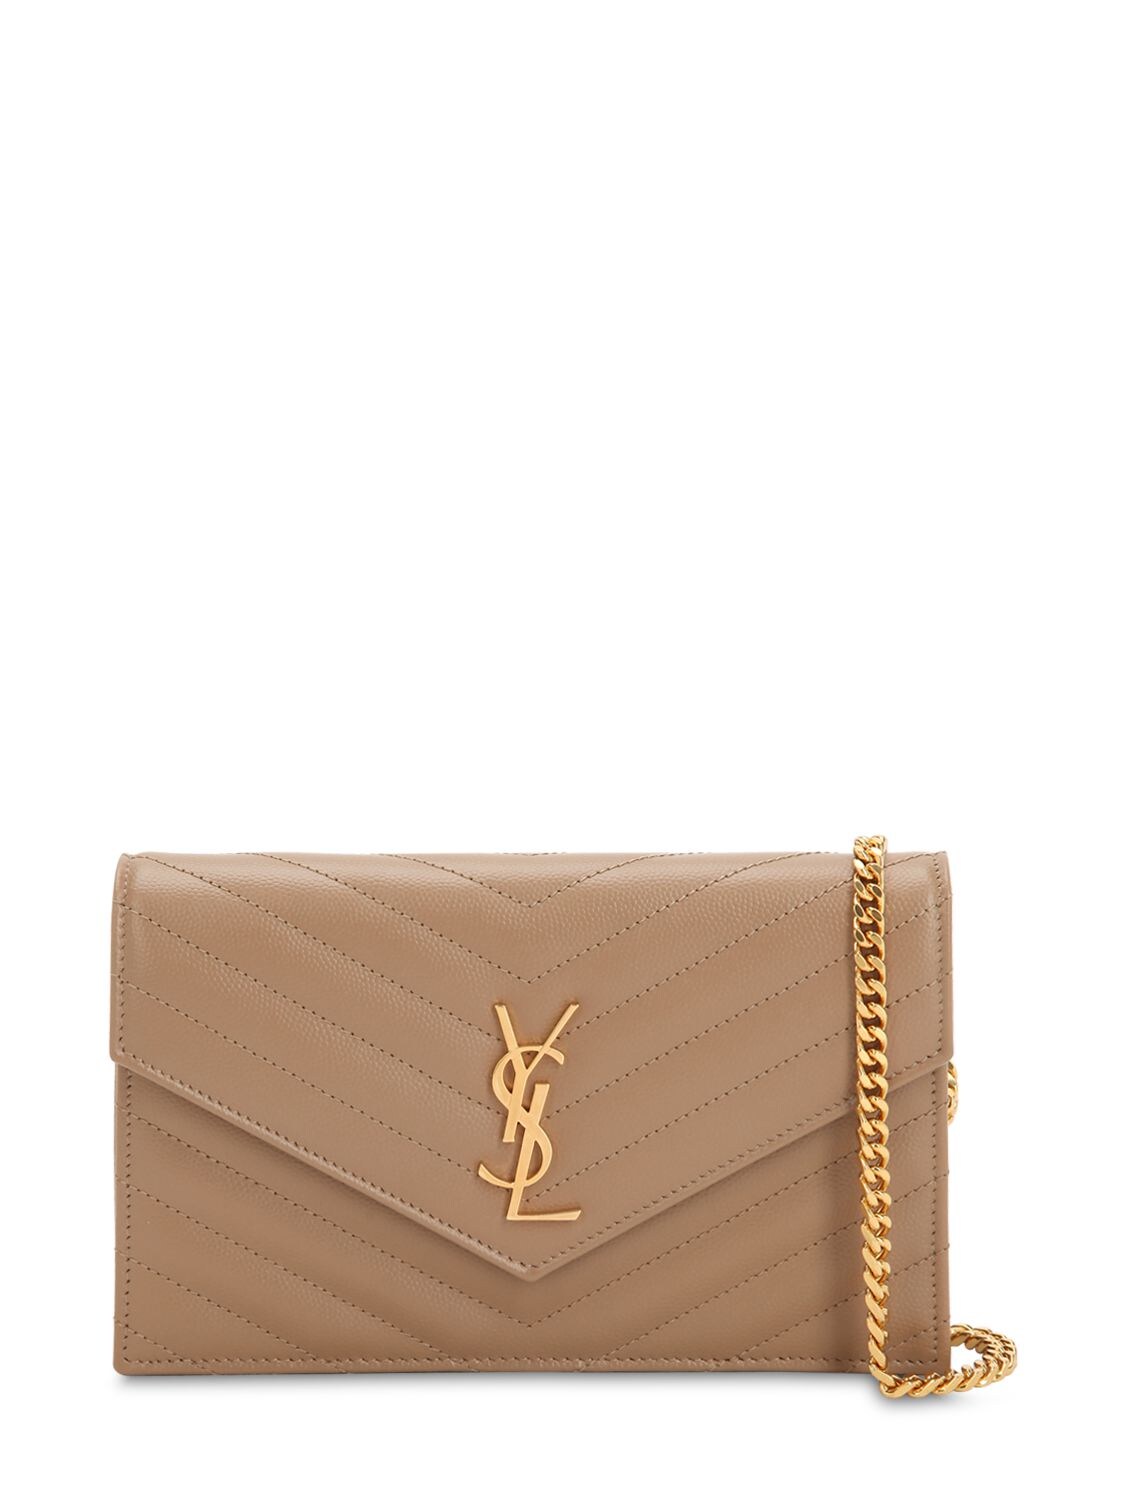 Saint Laurent Small Monogram Quilted Leather Bag In Chene